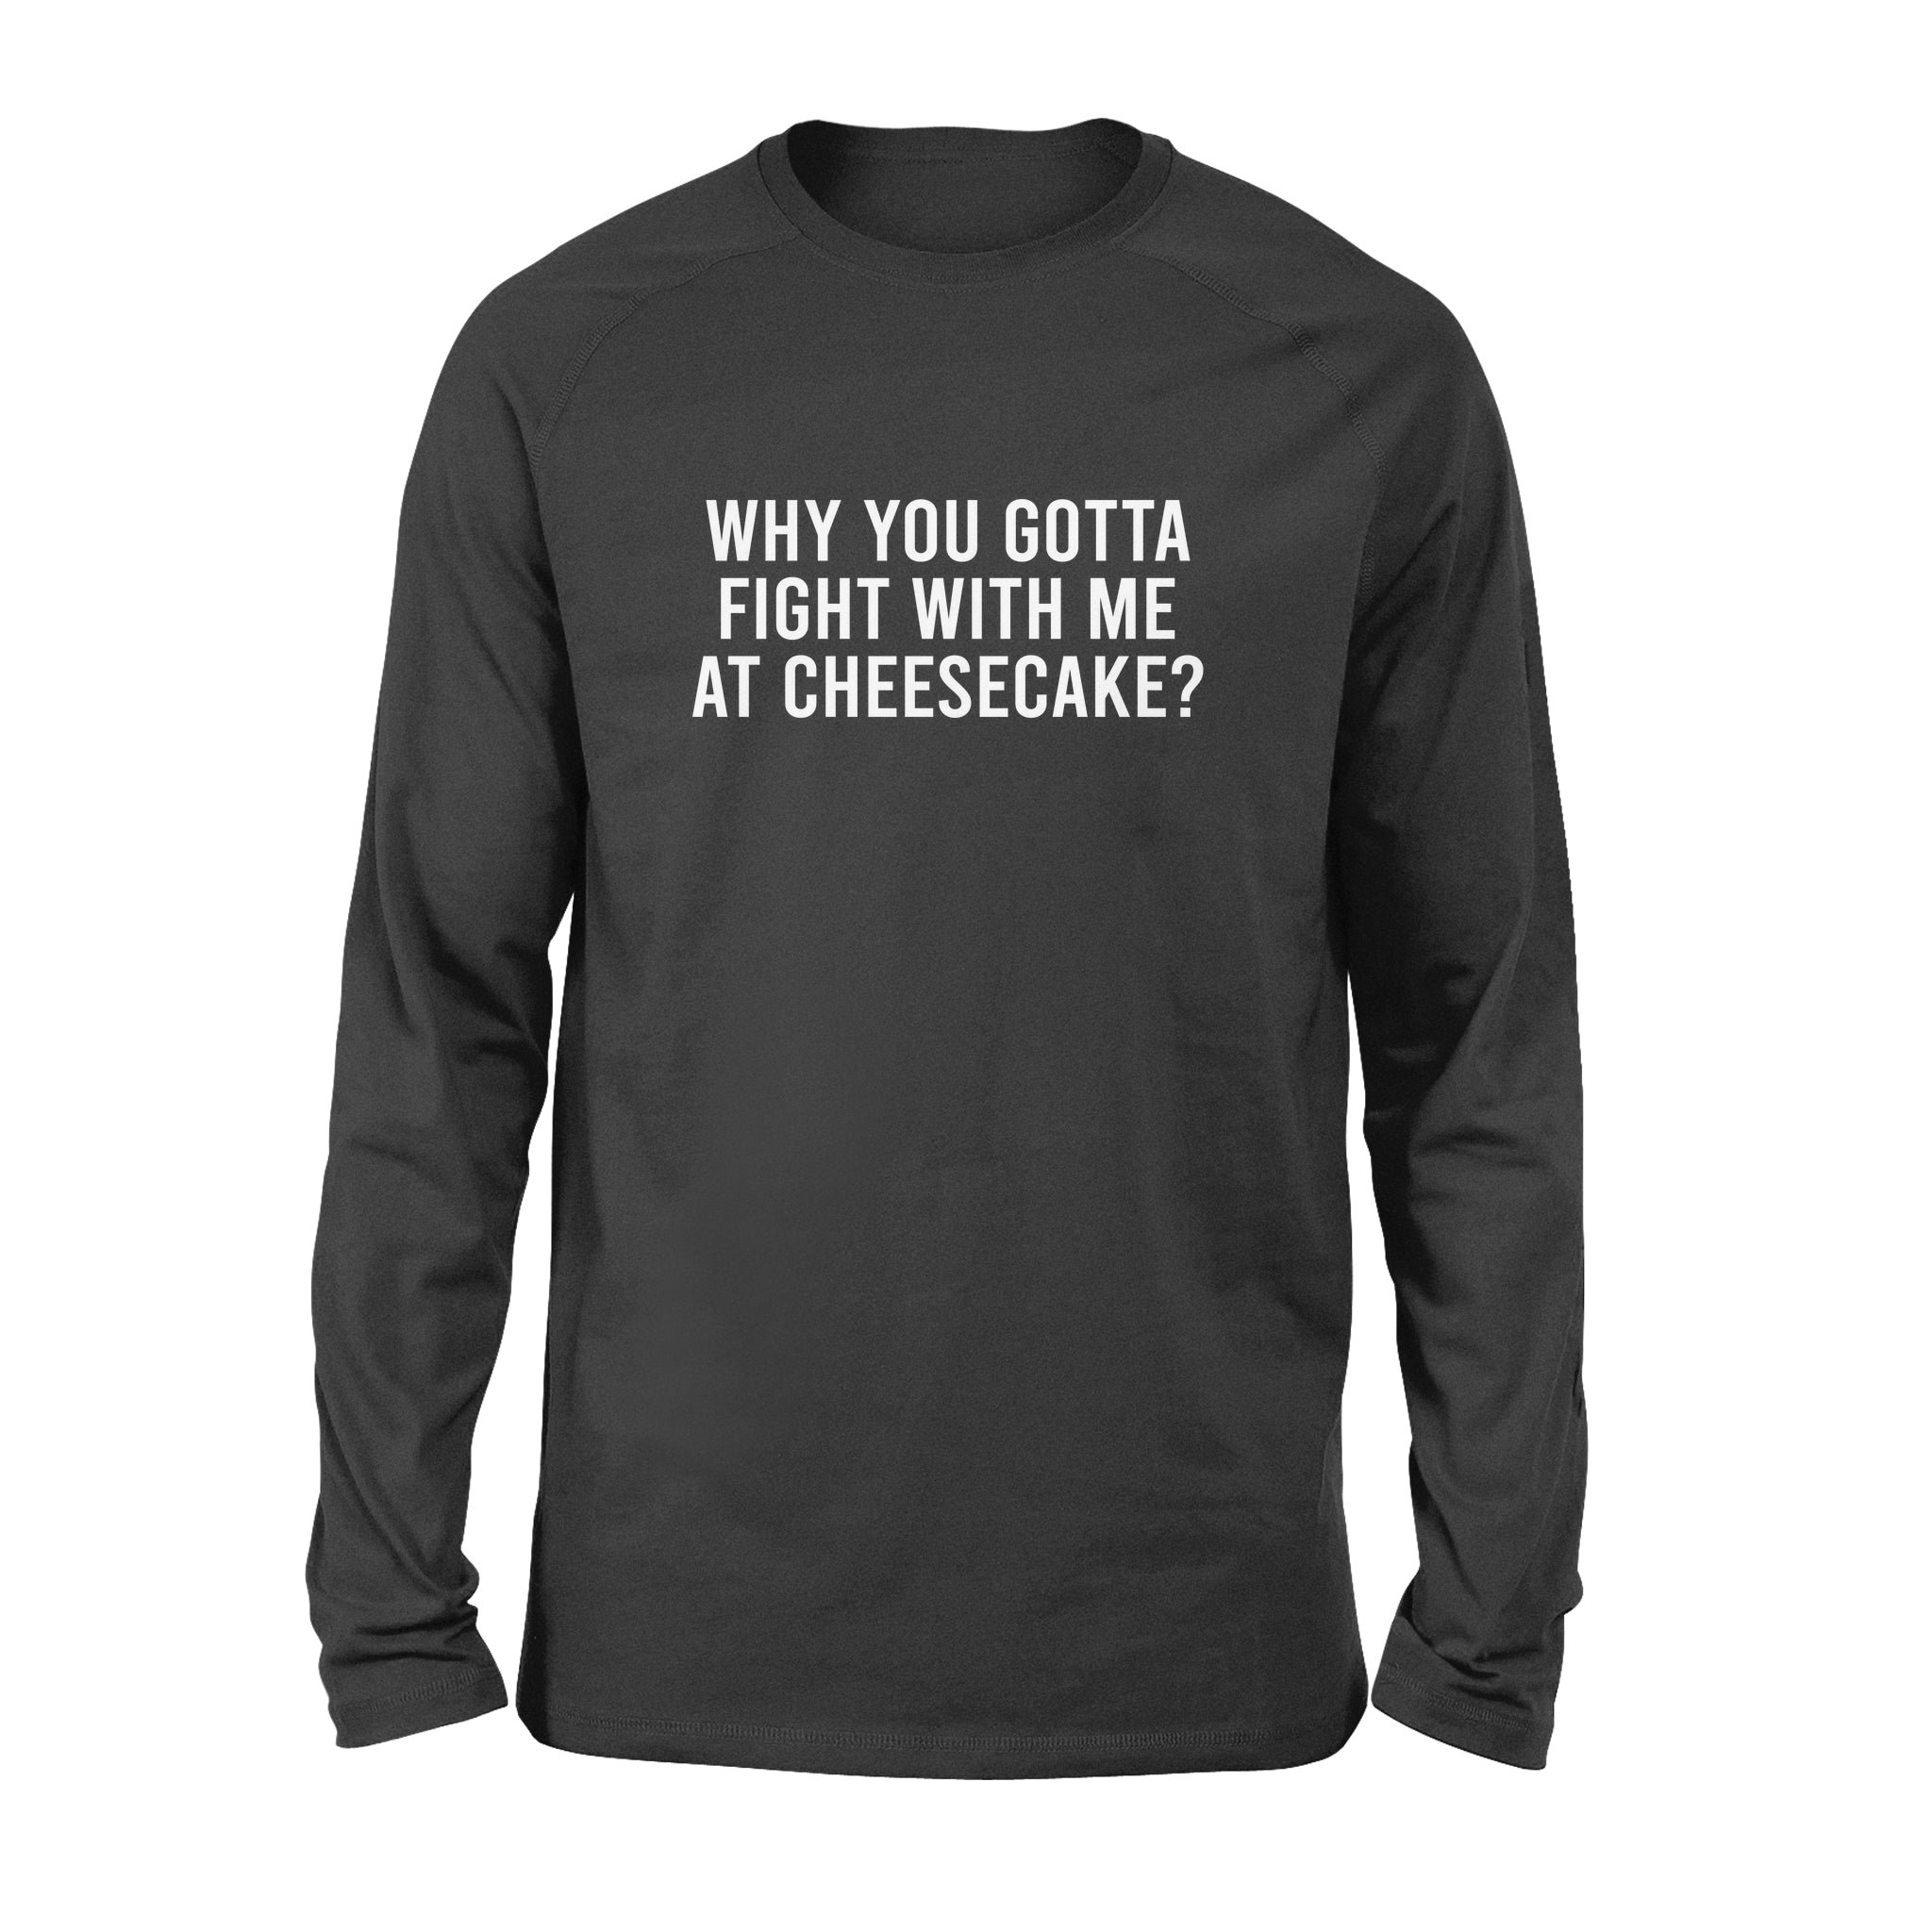 Why You Gotta Fight with me at Cheesecake - Standard Long Sleeve